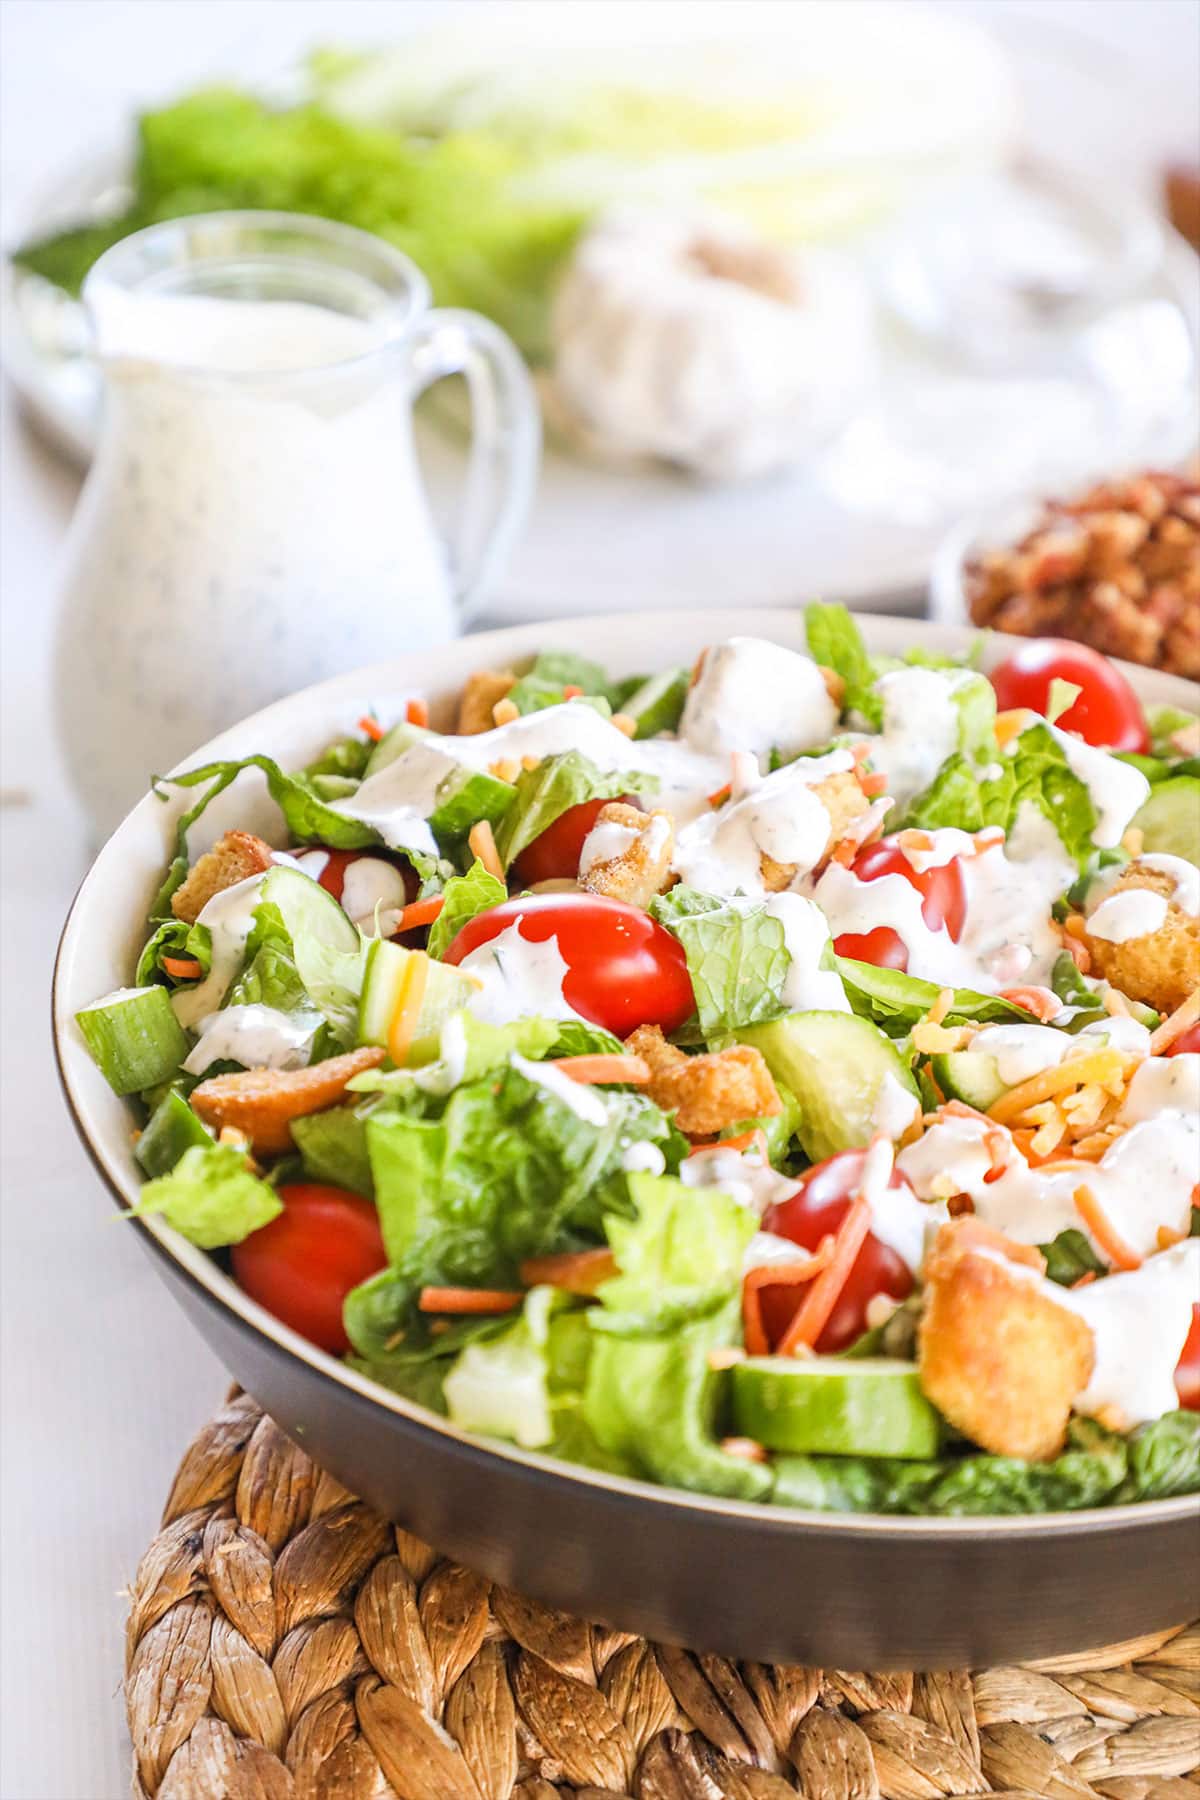 A side salad full of lettuce, tomatoes and croutons with Ranch Dressing